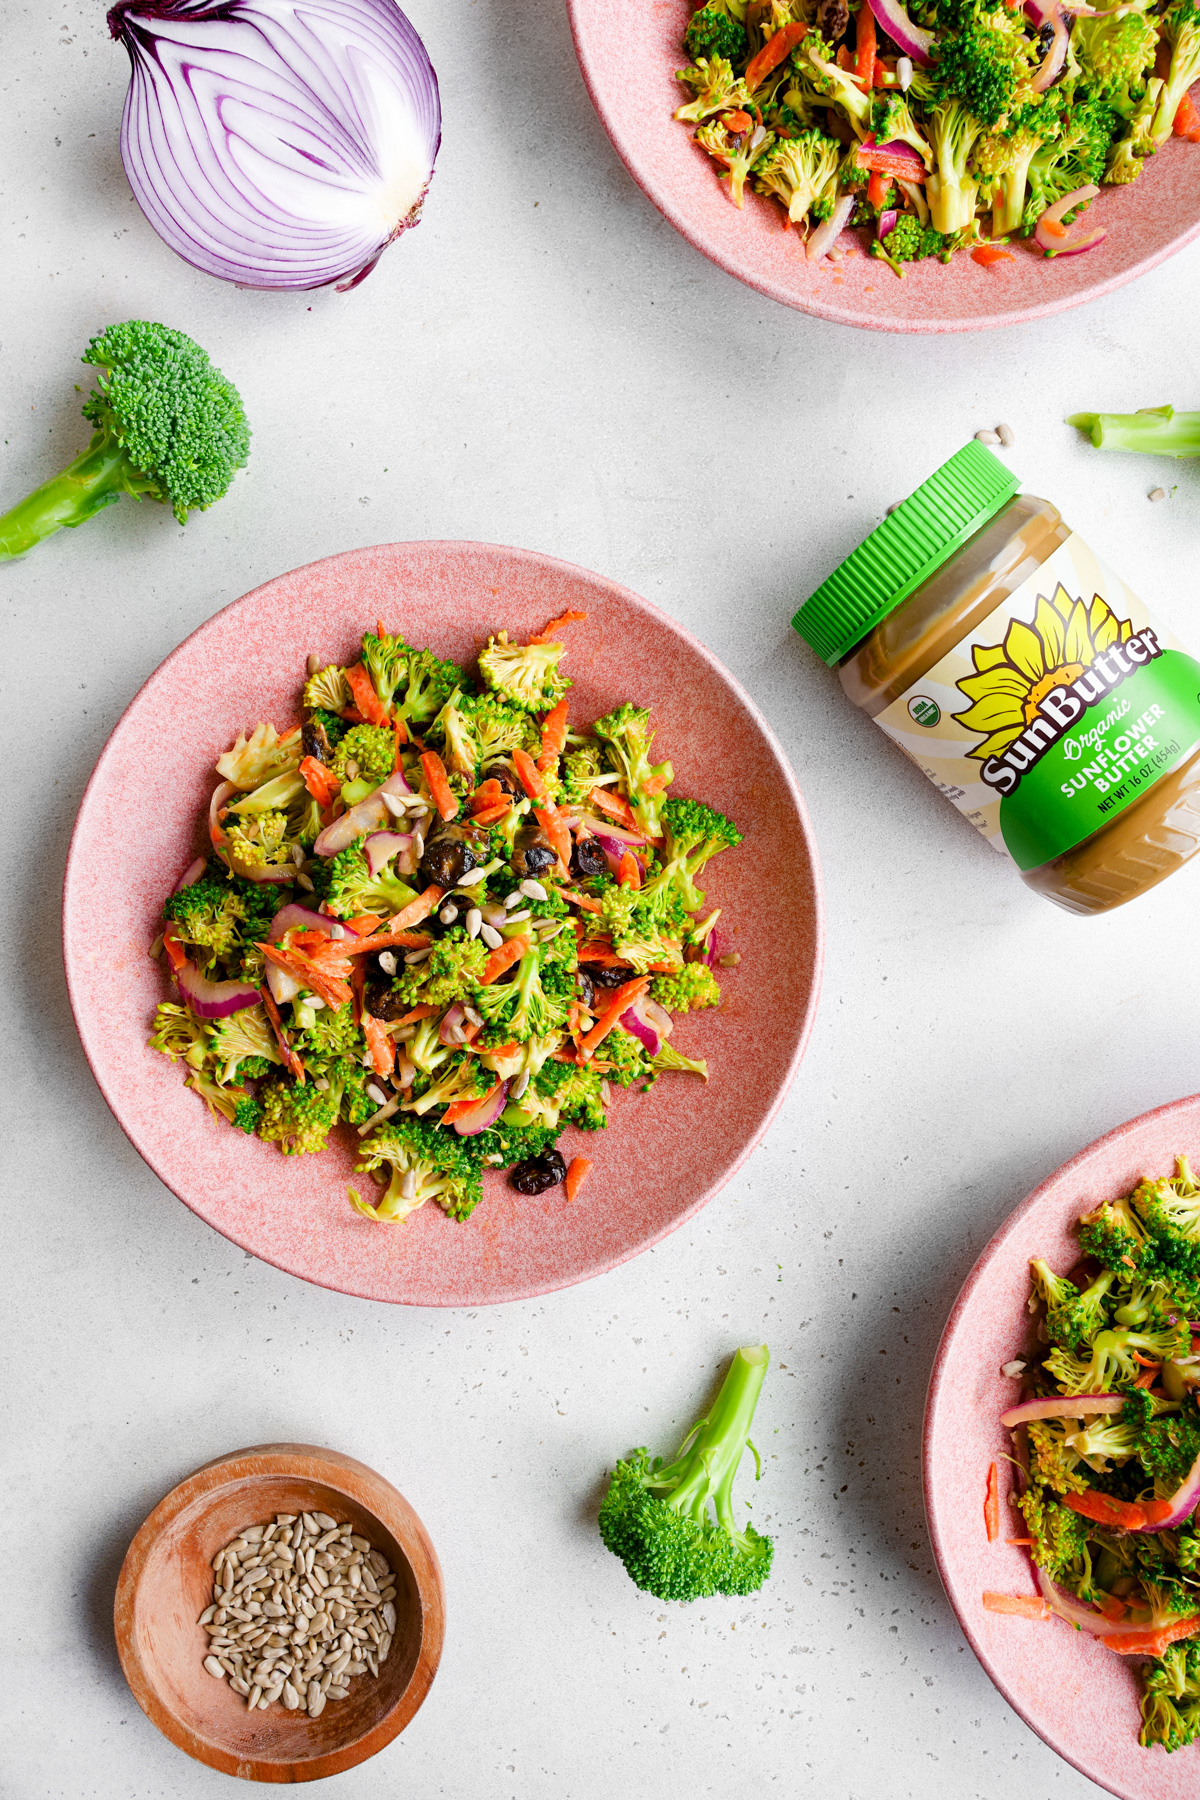 the broccoli crunch salad with the organic sunflower butter